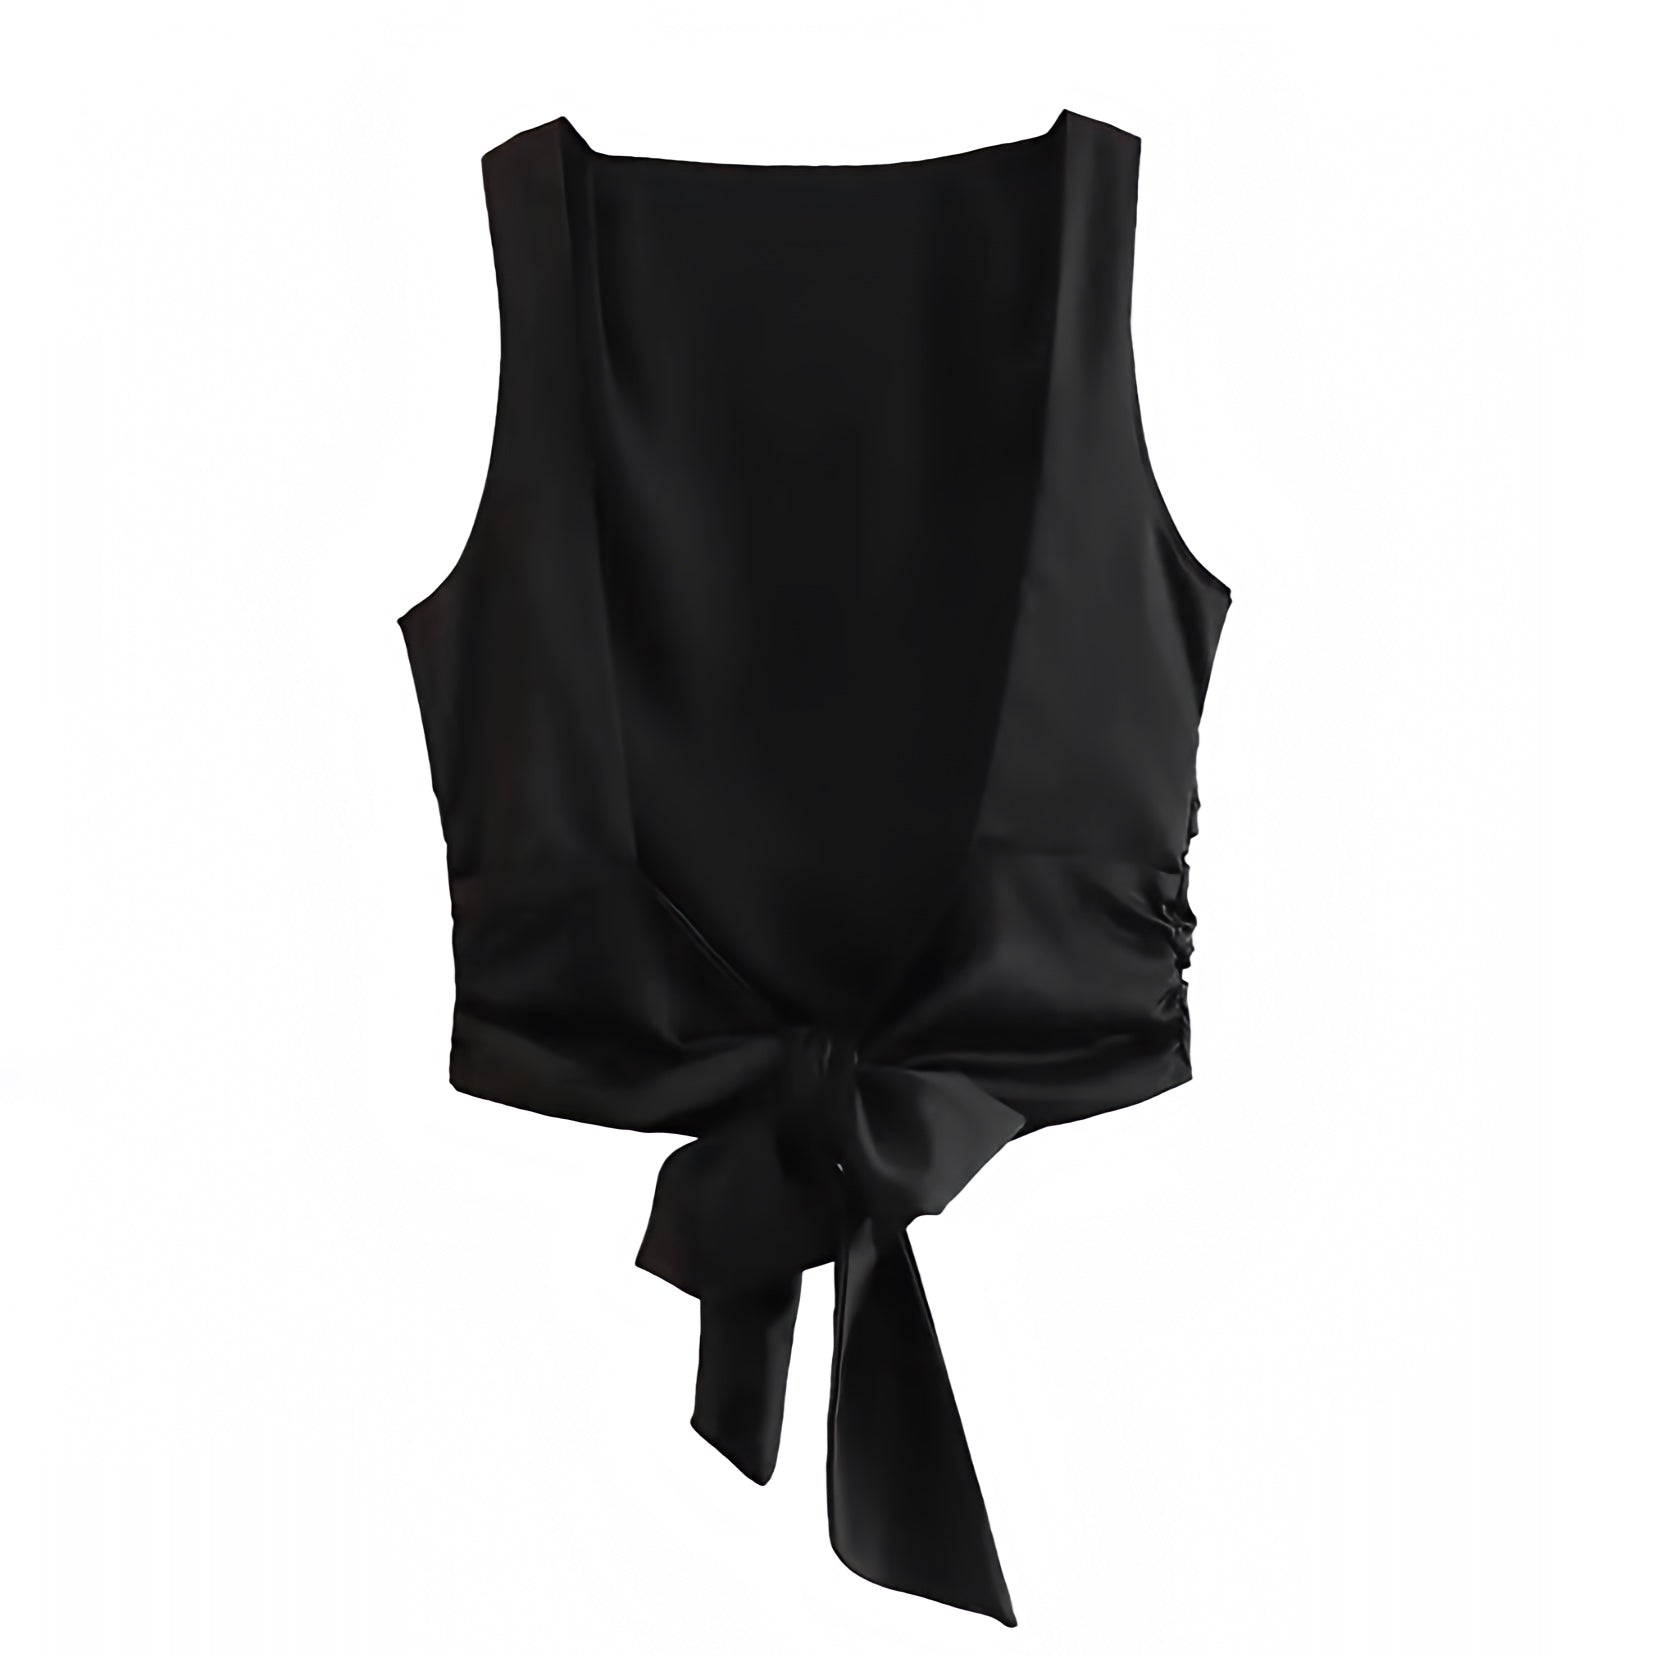 black-satin-silk-metallic-slim-fit-ruched-draped-bodycon-boatneck-sleeveless-short-sleeve-backless-open-back-bow-string-tie-full-length-hip-camisole-crop-tank-top-blouse-shirt-women-ladies-teens-tweens-chic-trendy-spring-2024-summer-elegant-casual-semi-formal-feminine-classy-cocktail-party-club-wear-sexy-date-night-out-evening-90s-minimalist-minimalism-office-siren-stockholm-style-tops-zara-revolve-aritzia-mango-reformation-whitefox-edikted-princess-polly-dupe